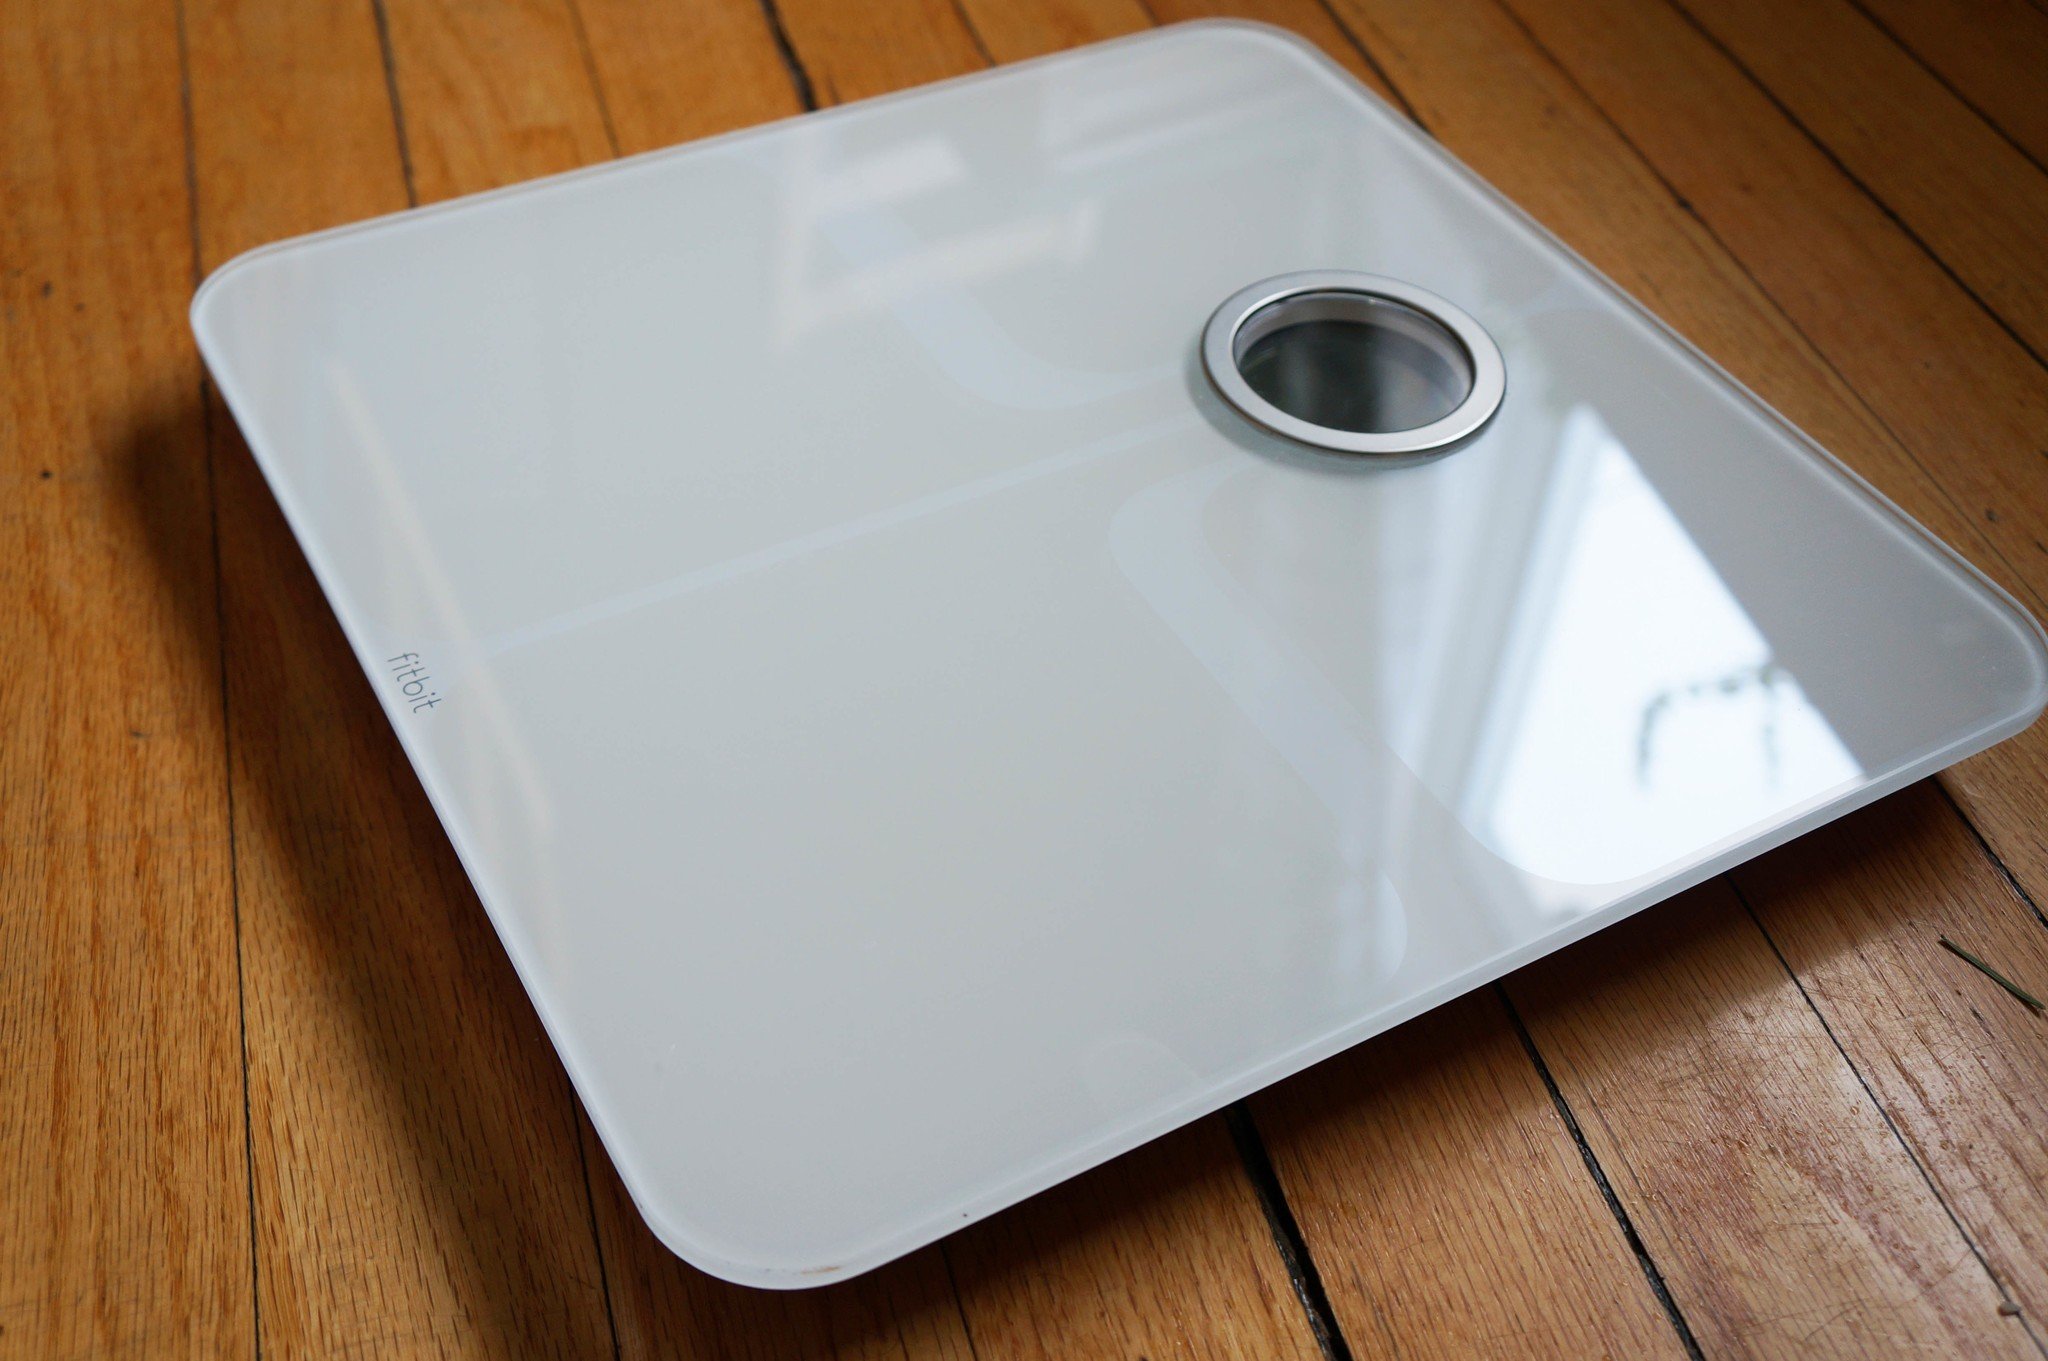 fitbit scale review